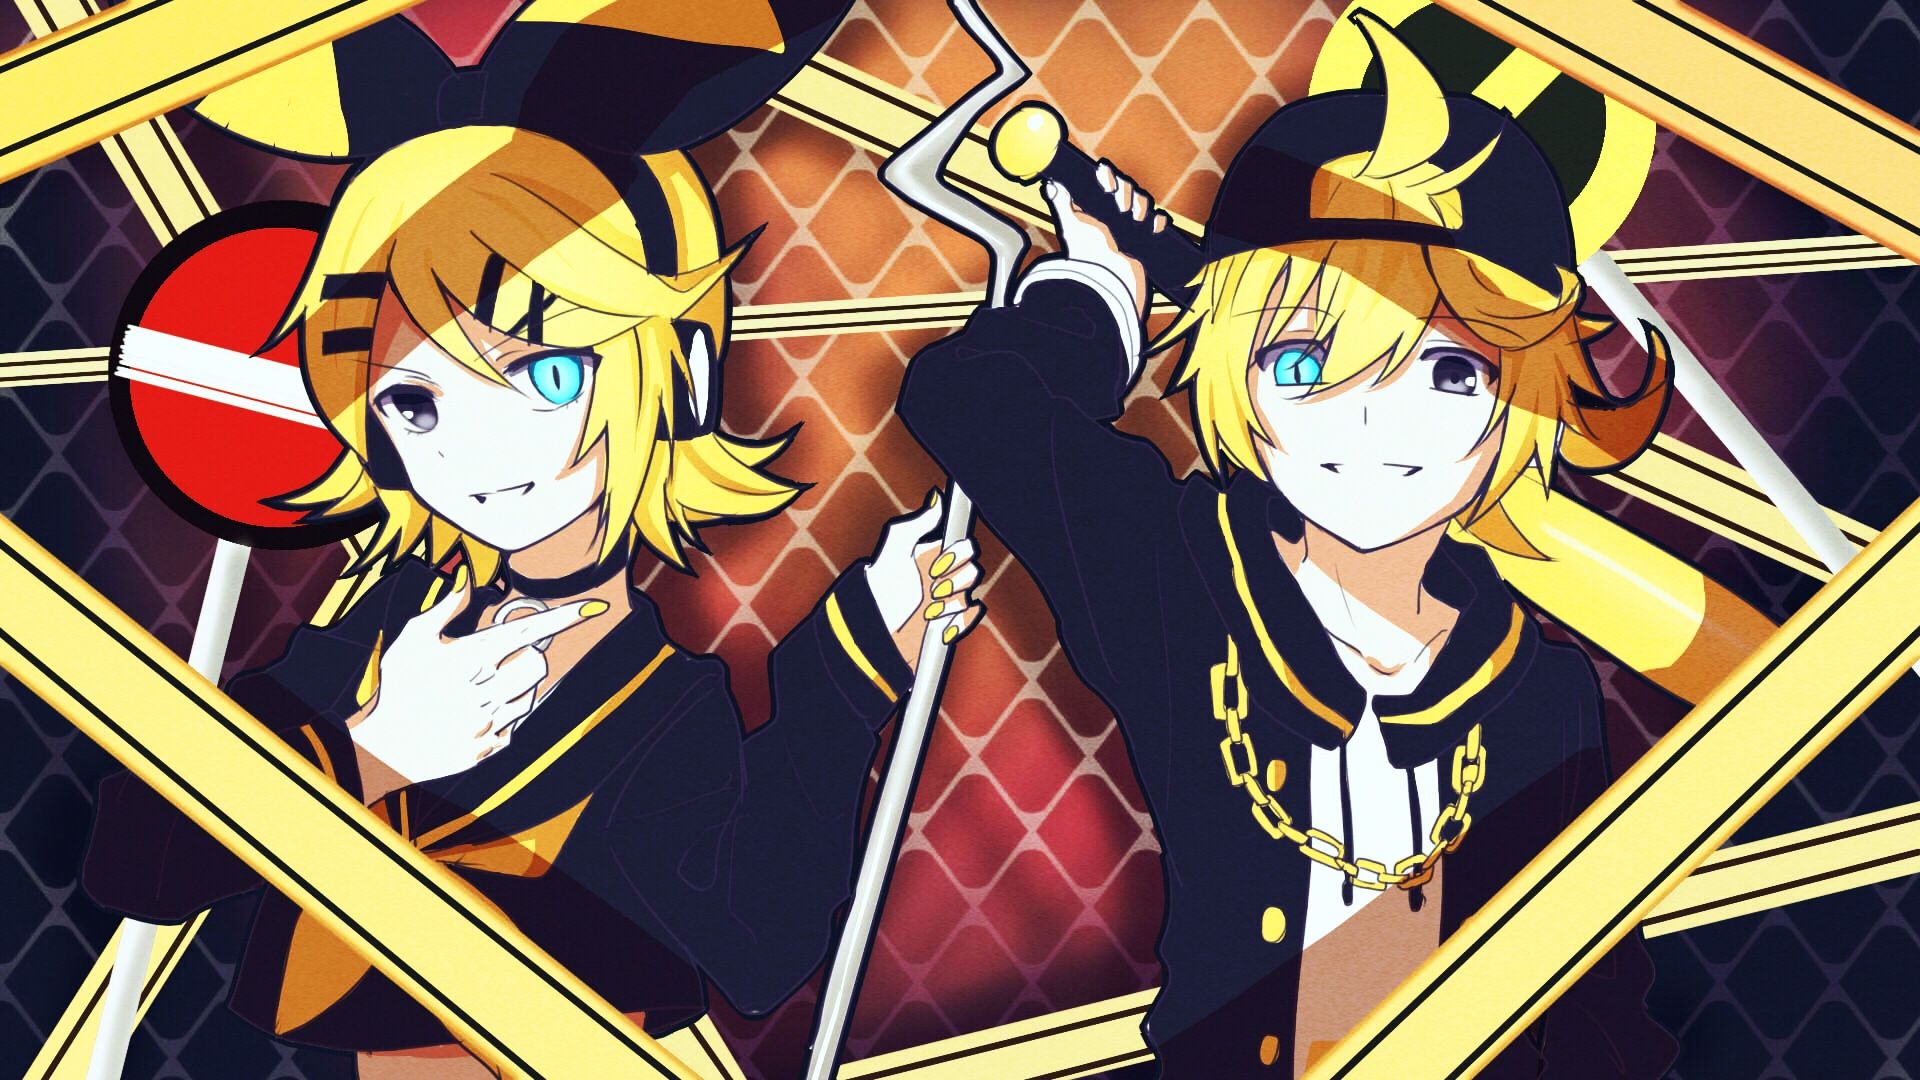 Mobile wallpaper: Anime, Vocaloid, Rin Kagamine, Len Kagamine, 906880 download the picture for free